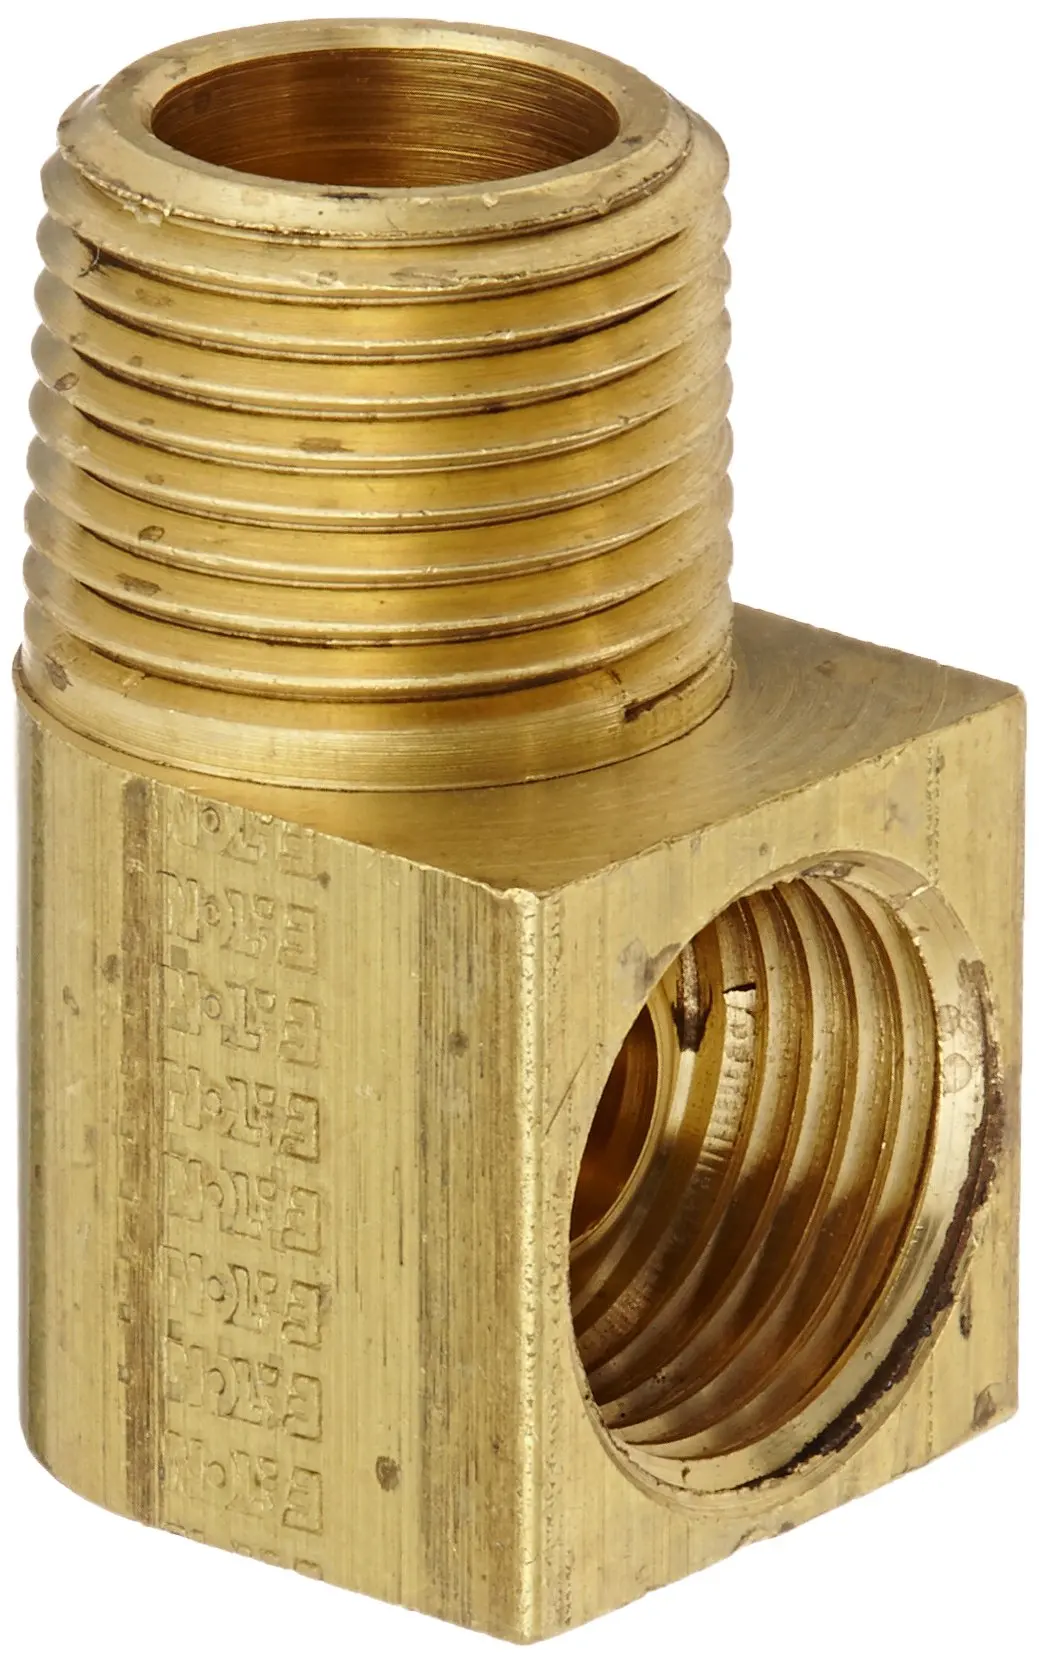 Buy Eaton Weatherhead 402X6X6 Brass CA360 Inverted Flare Brass Fitting, 90 Degree Elbow, 3/8 1 2 20 Inverted Flare 90 Degree Fitting